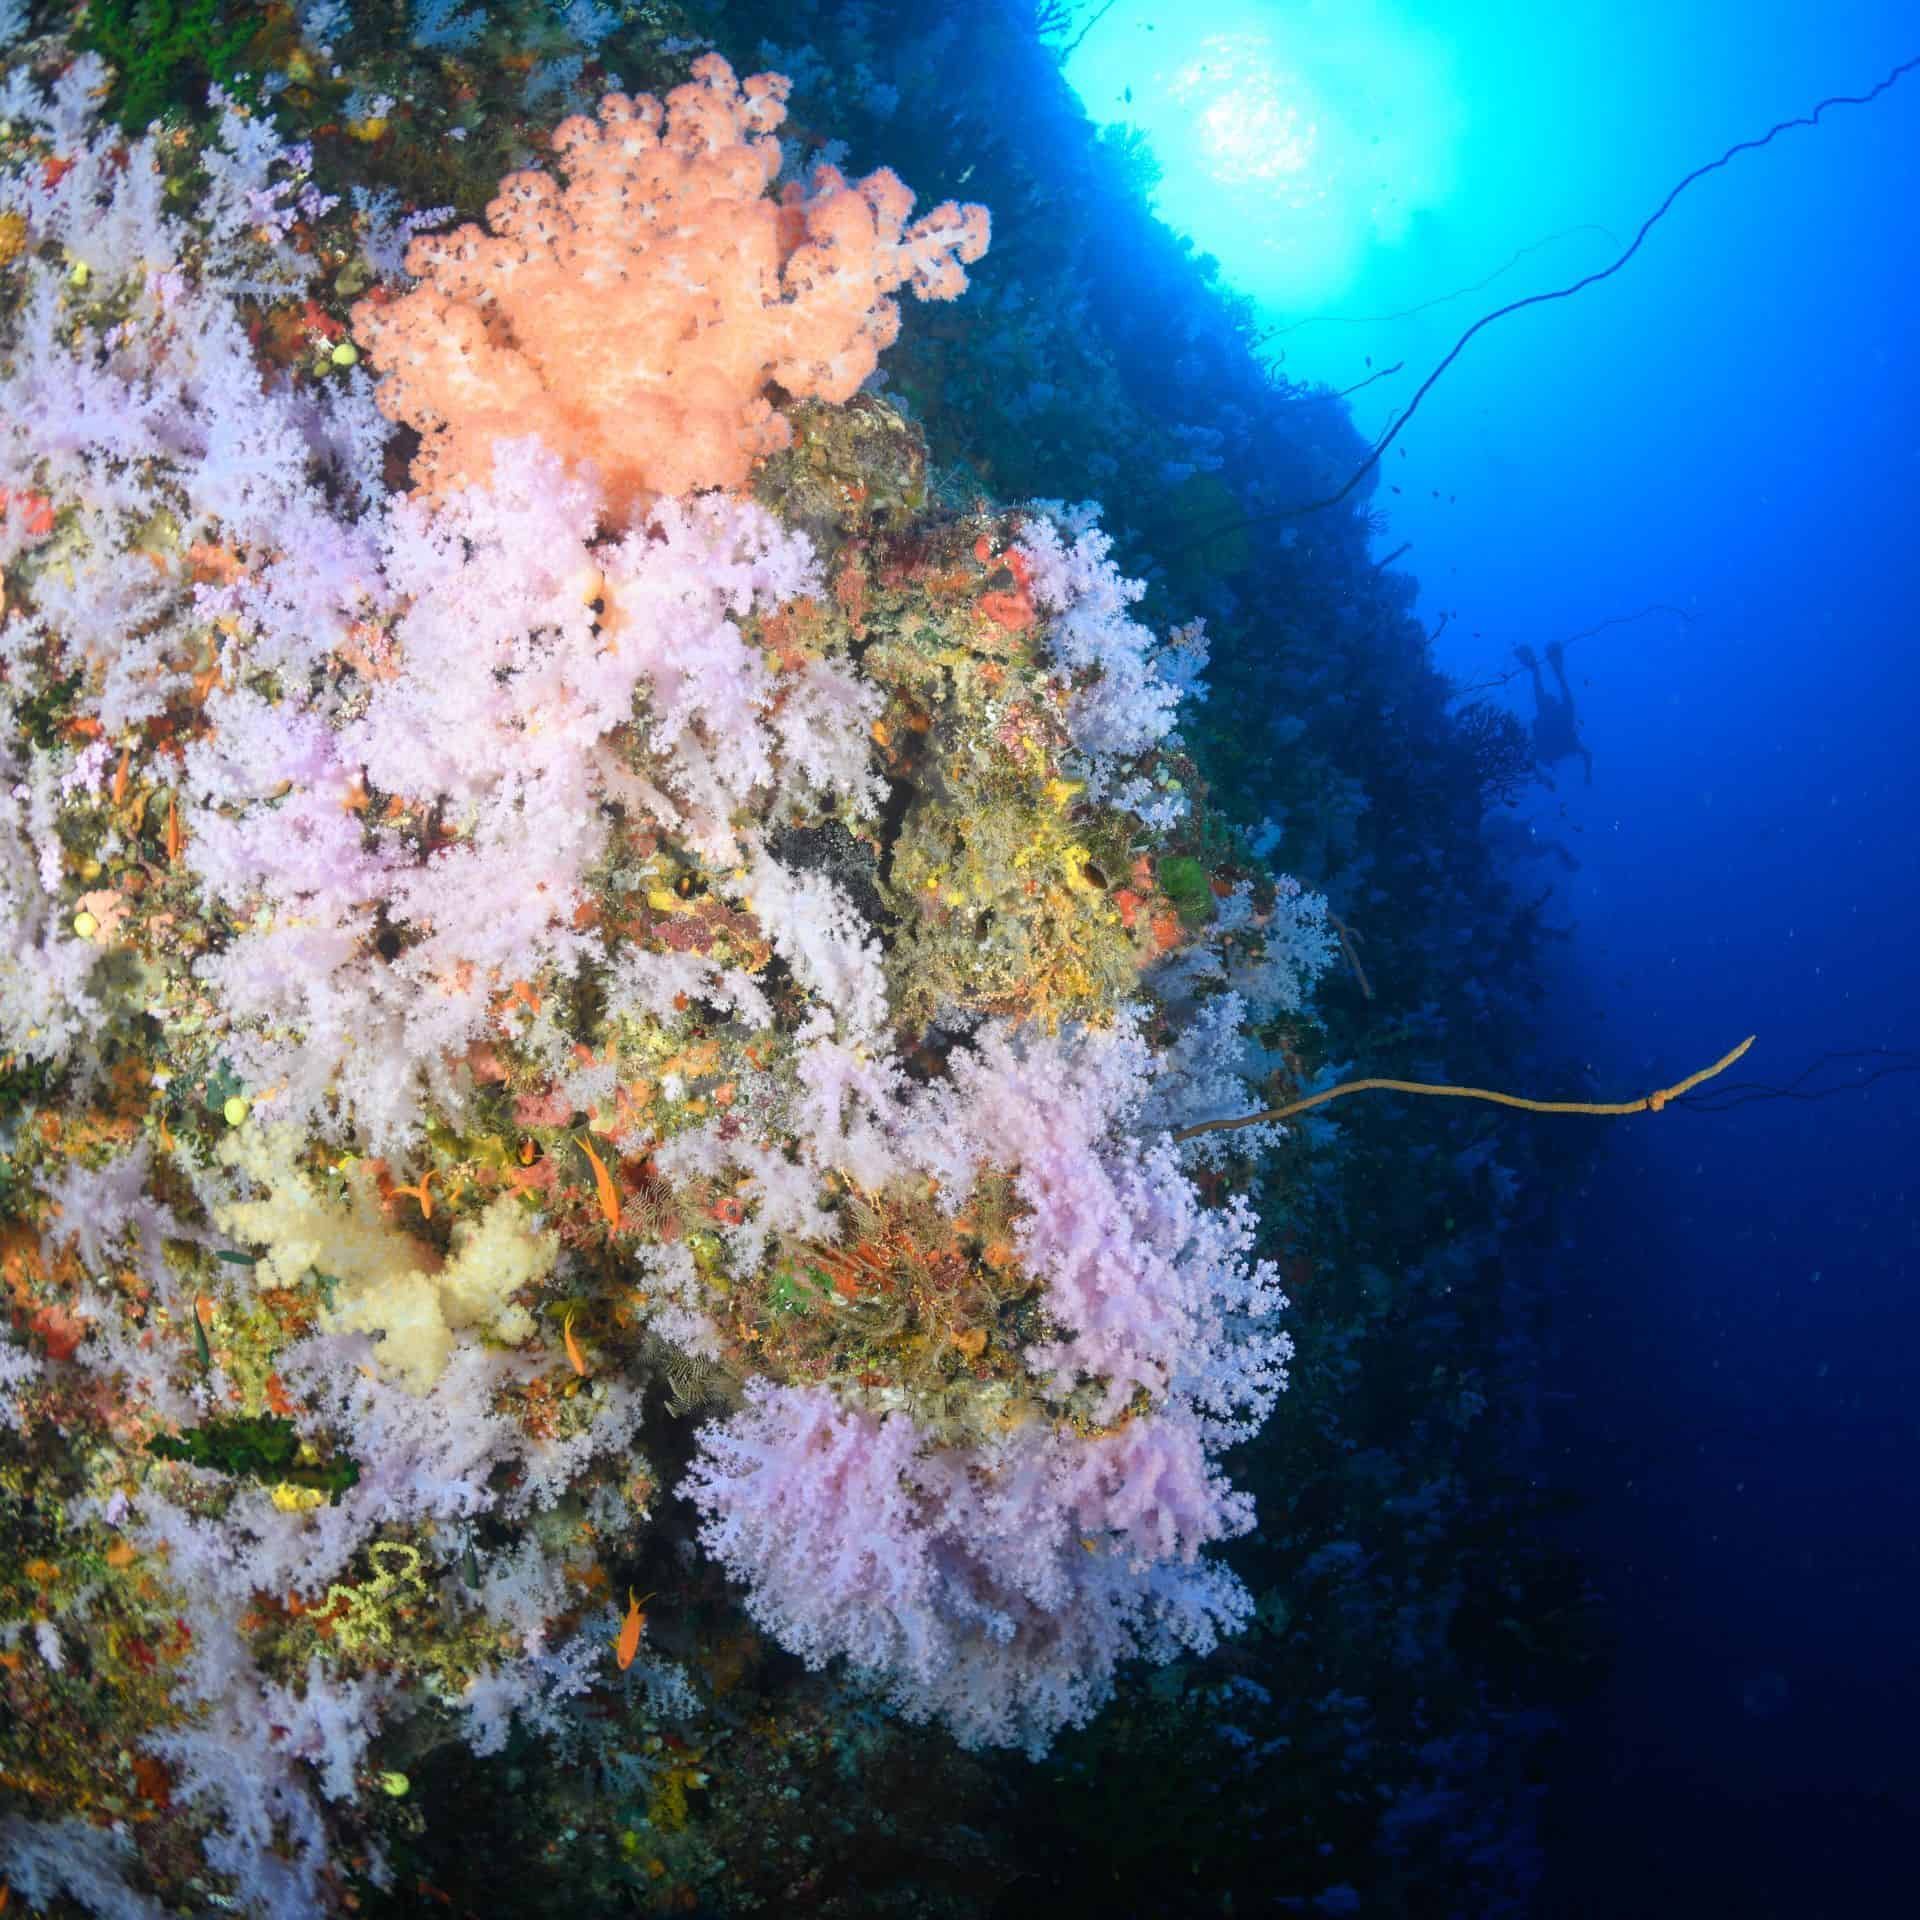 The soft corals glowing white on the Great White Wall in Fiji seen during a dive package to world famous Rainbow Reef